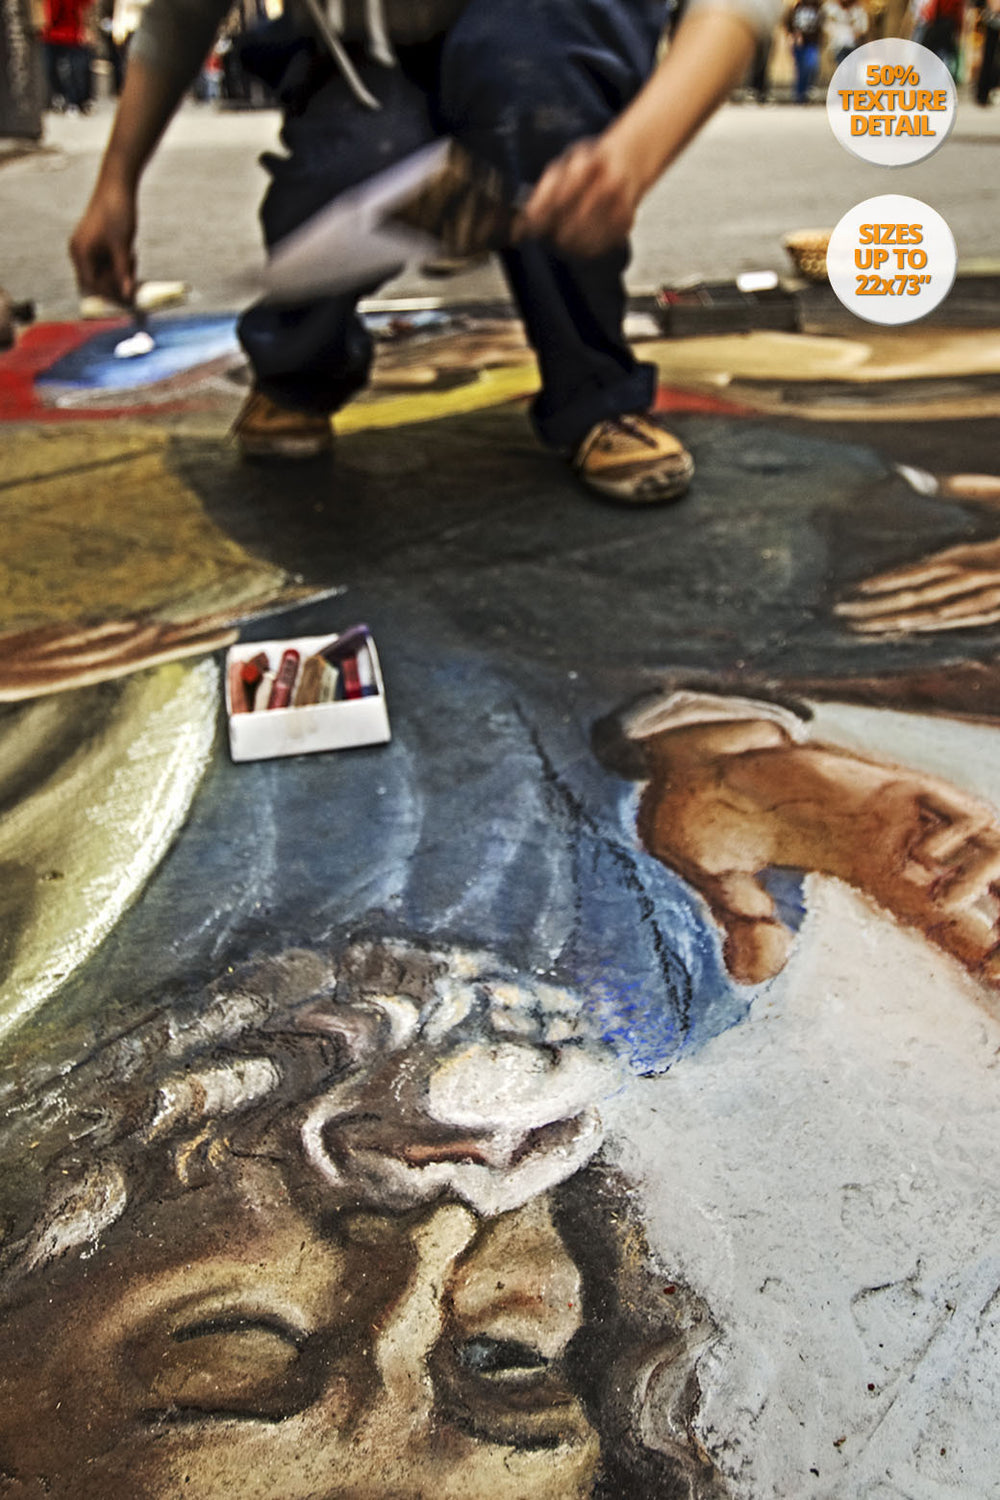 Classic chalk painting in Florence. | 50% Detail. | By Alberto Mateo, Travel Photographer.